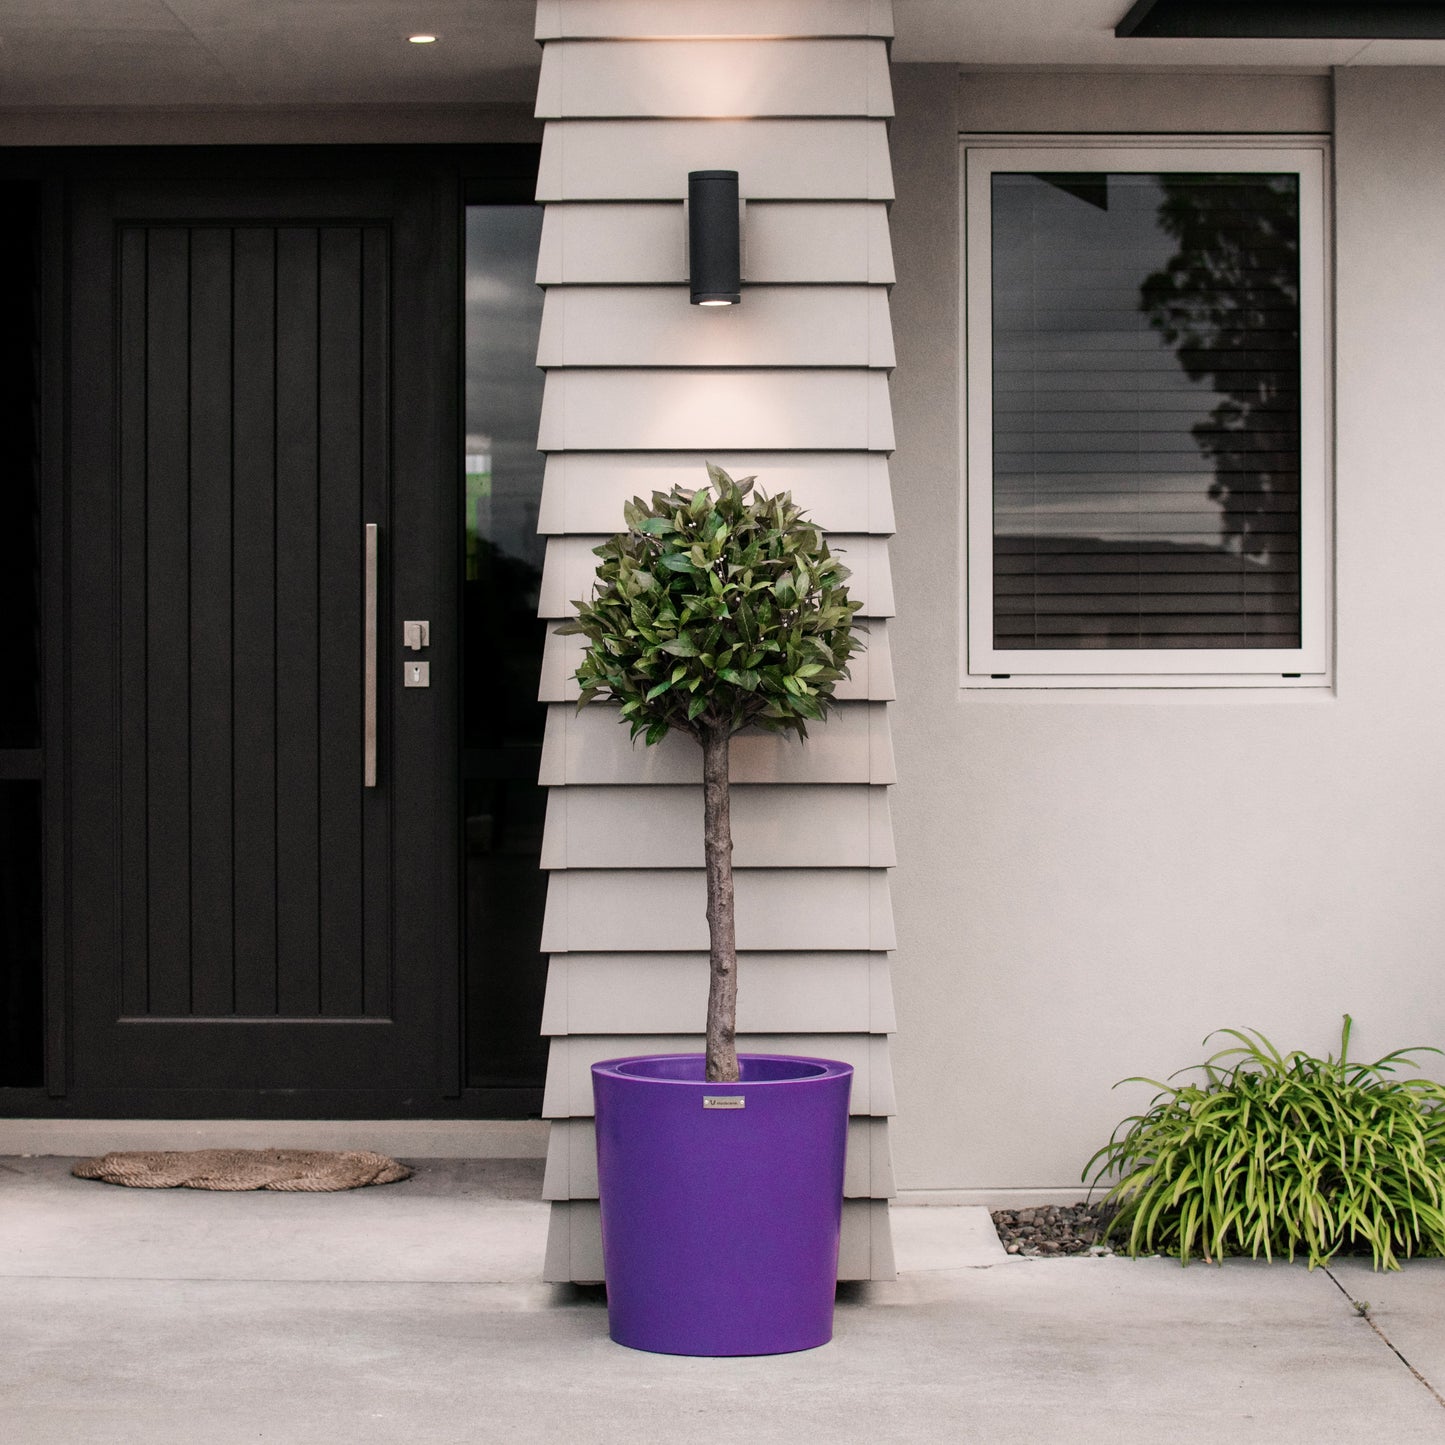 A purple Modscene planter pot in front of a house.